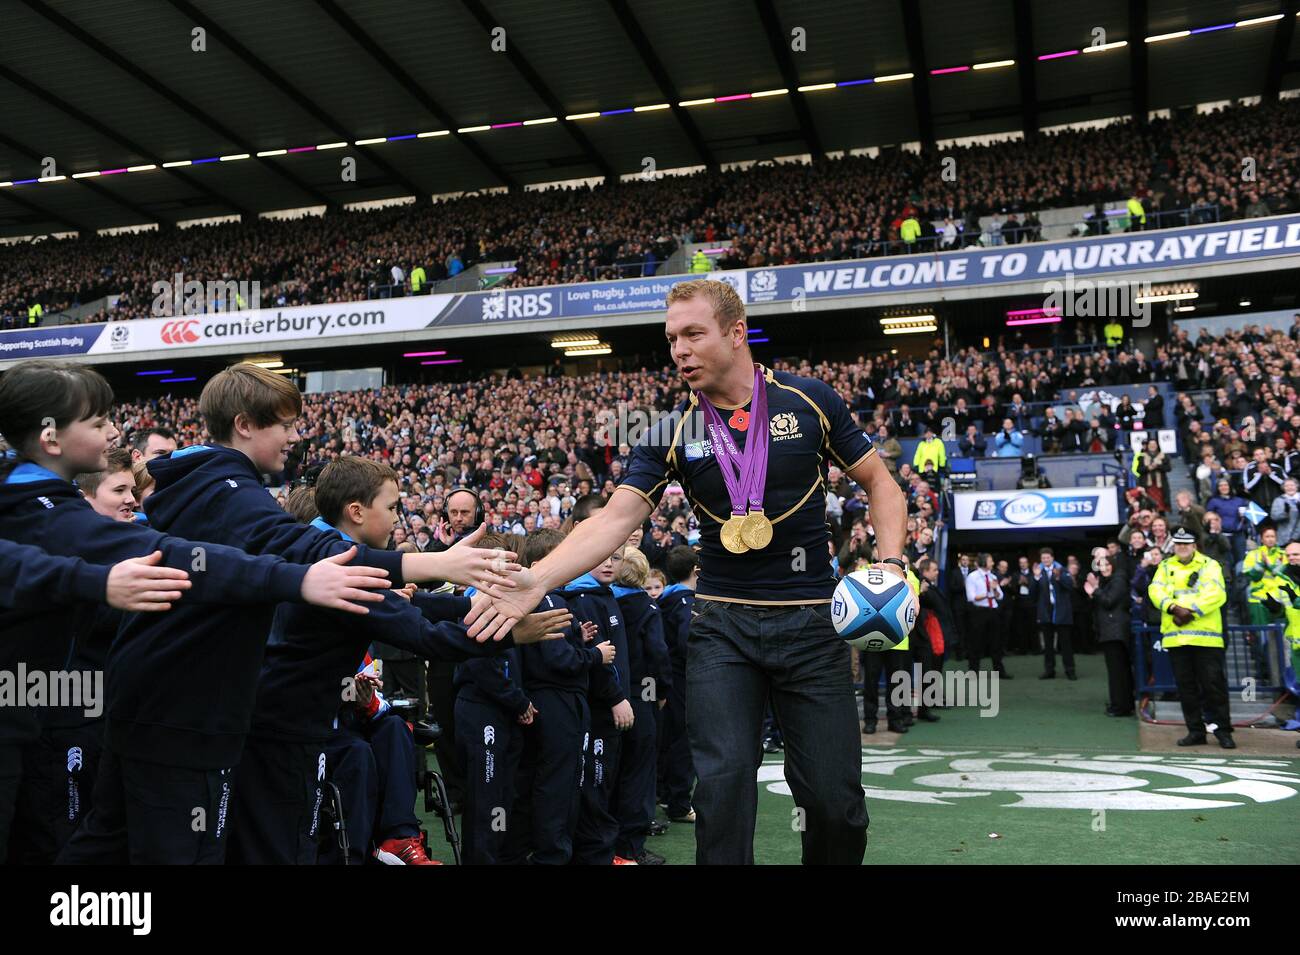 Great Britain's Olympic gold medal winner Sir Chris Hoy carries the match ball onto the pitch Stock Photo